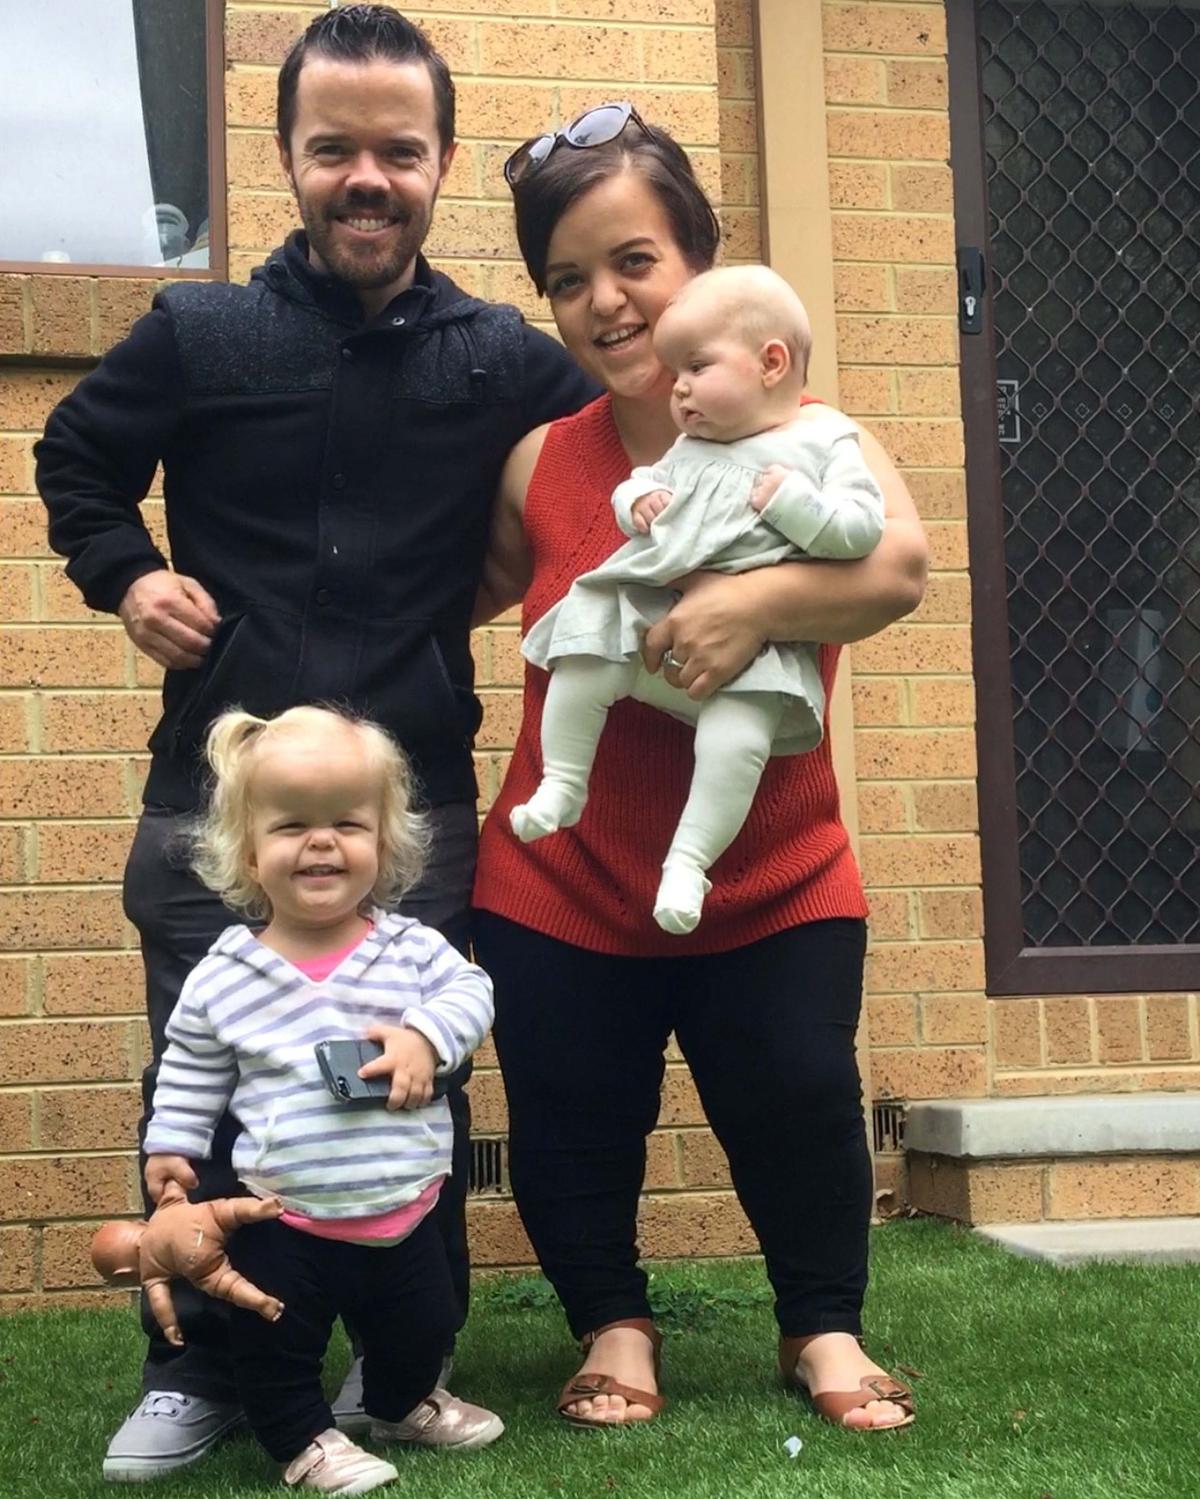 Alyssa Biddle and Jonathon Tripp with their two daughters, Bonnie and Sienna (Caters News)